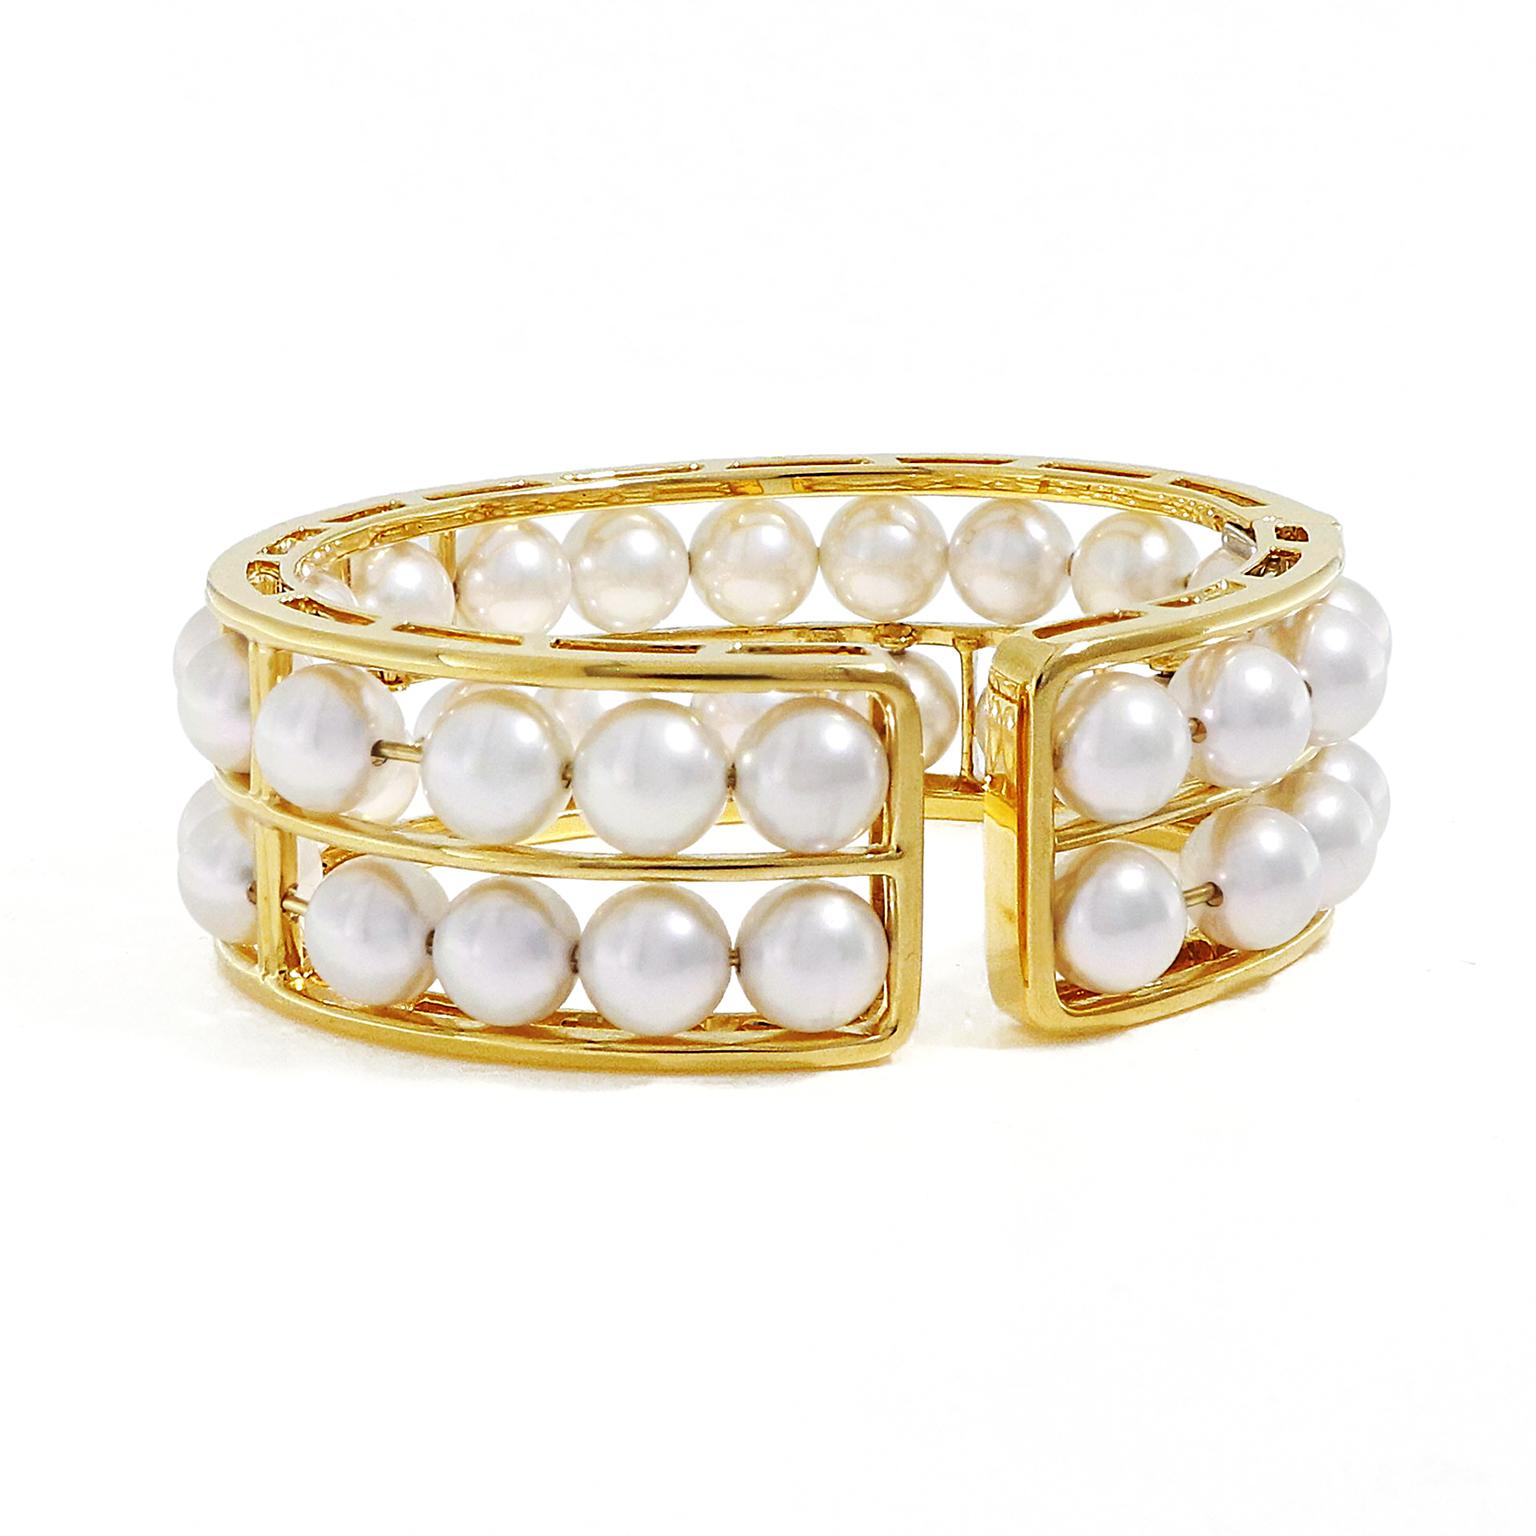 This narrow 18k yellow gold cuff bracelet gives the illusion of floating pearls. As the 38 round Akoya pearls that adorn the cuff, shift and slide, the impression is created. The pearls are secured with gold wire and the 2 gold rows gleam in between